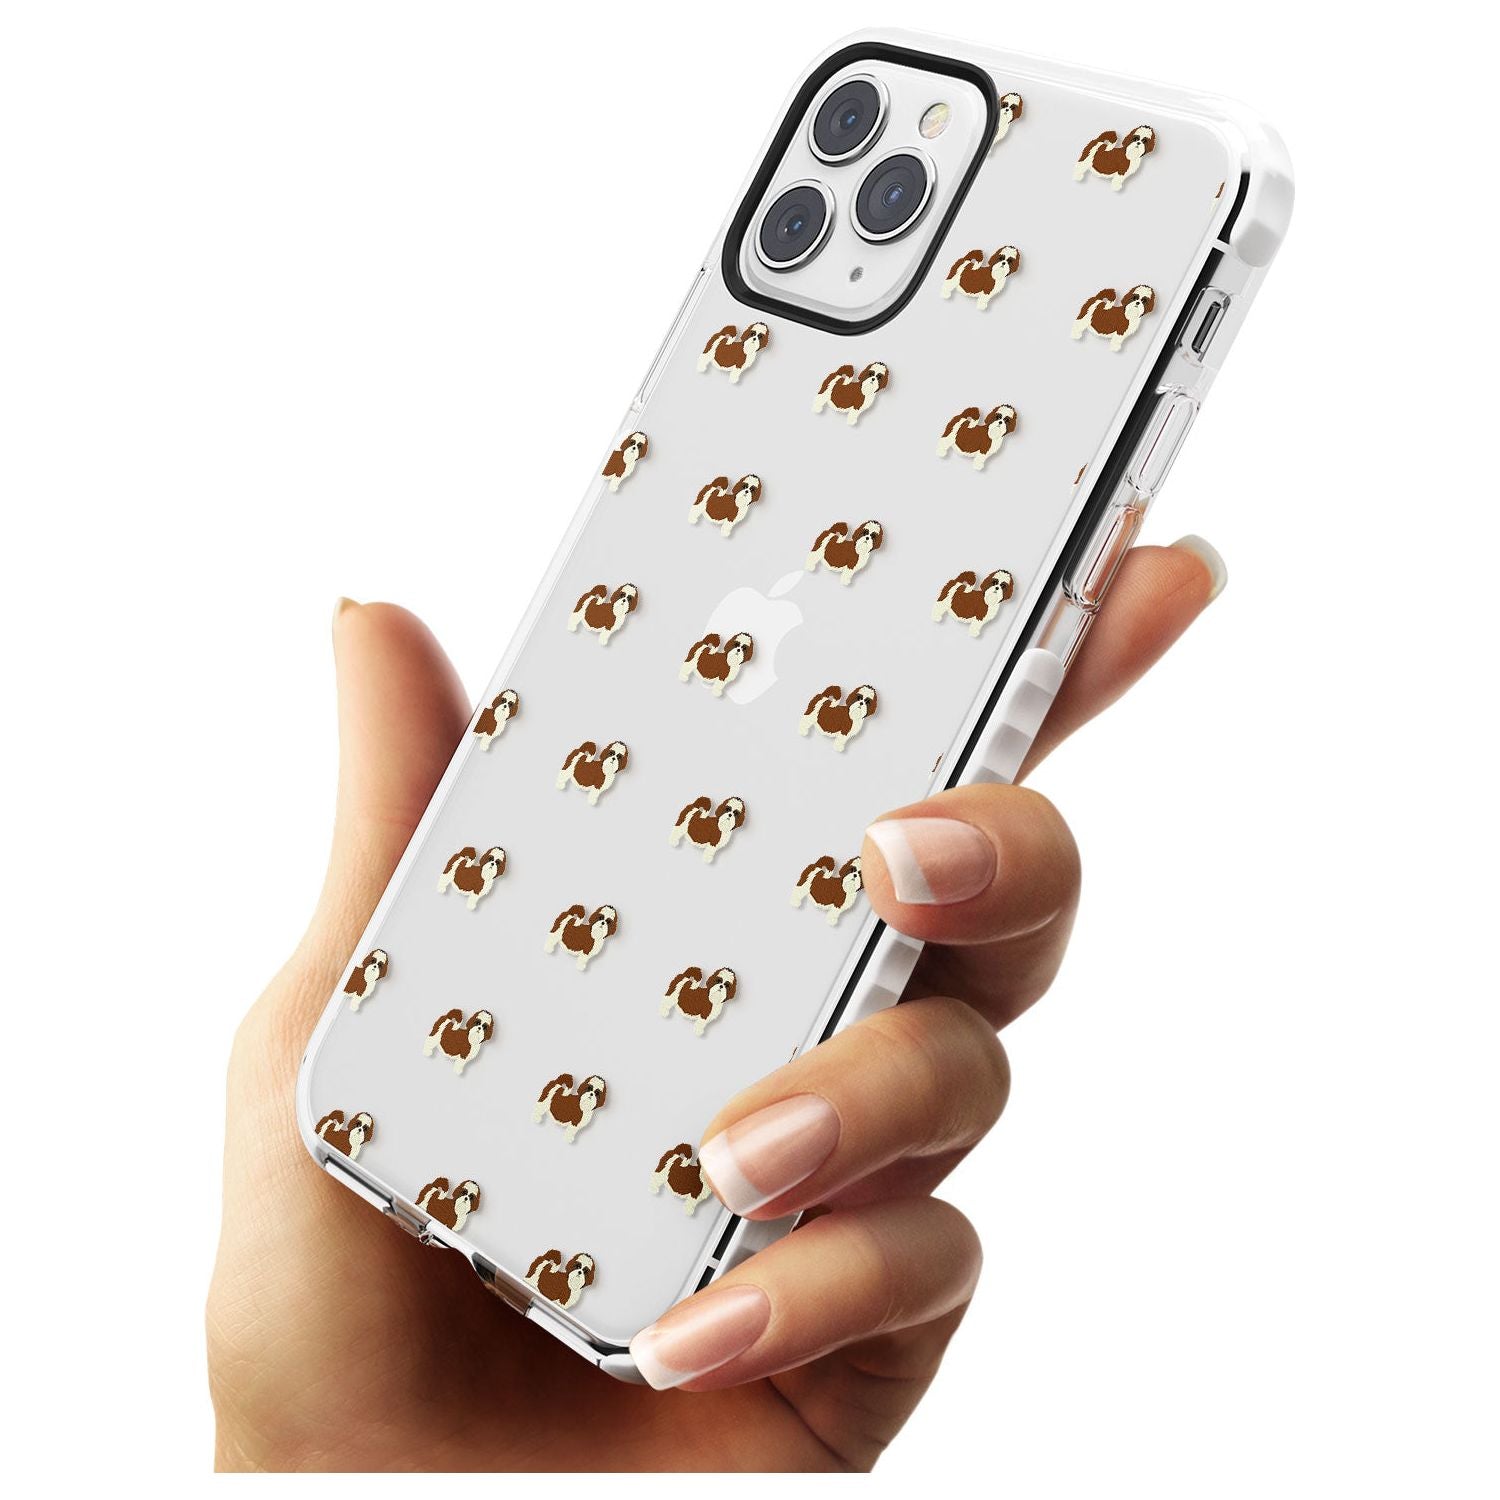 Shih Tzu Dog Pattern Clear Impact Phone Case for iPhone 11 Pro Max